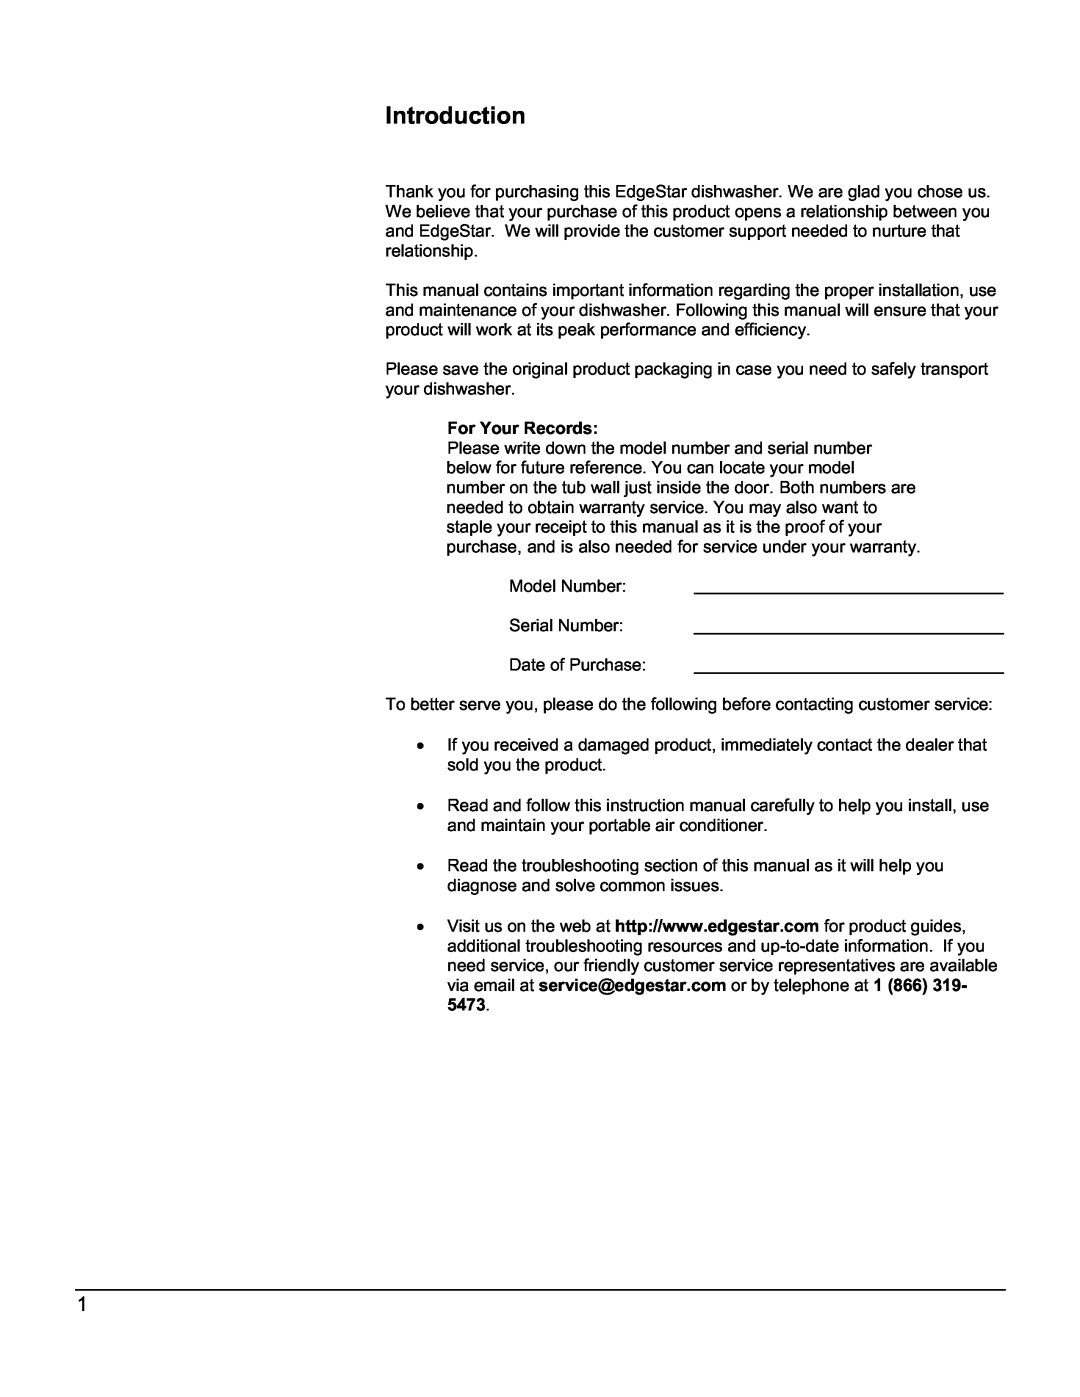 EdgeStar DWP60ES owner manual Introduction, For Your Records 